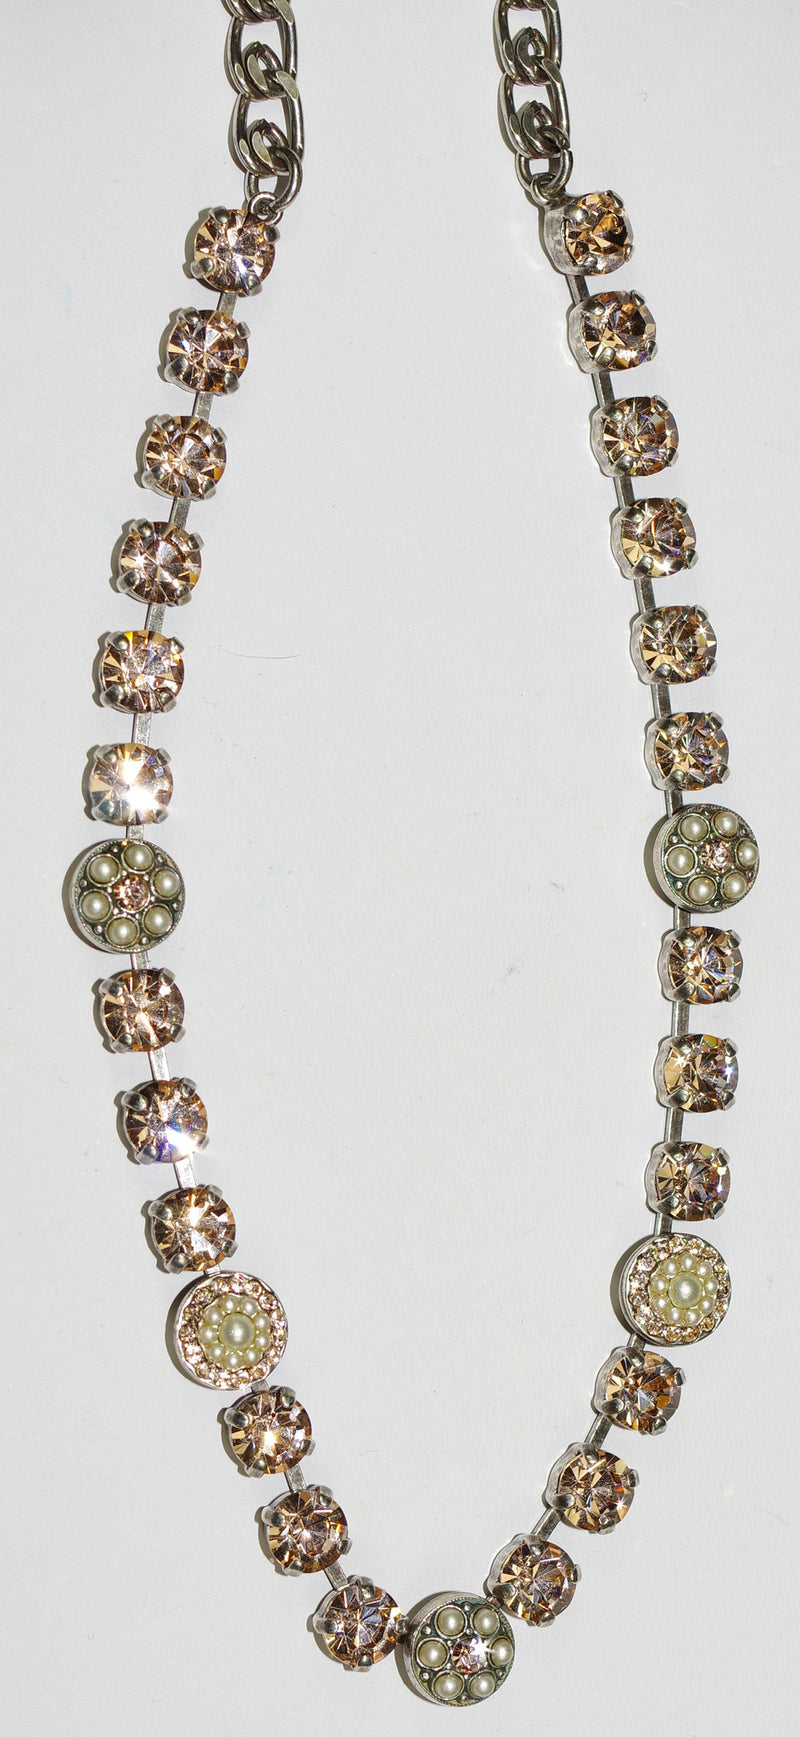 MARIANA NECKLACE BEAUTY: amber, pearl stones in silver setting, 17" adjustable chain